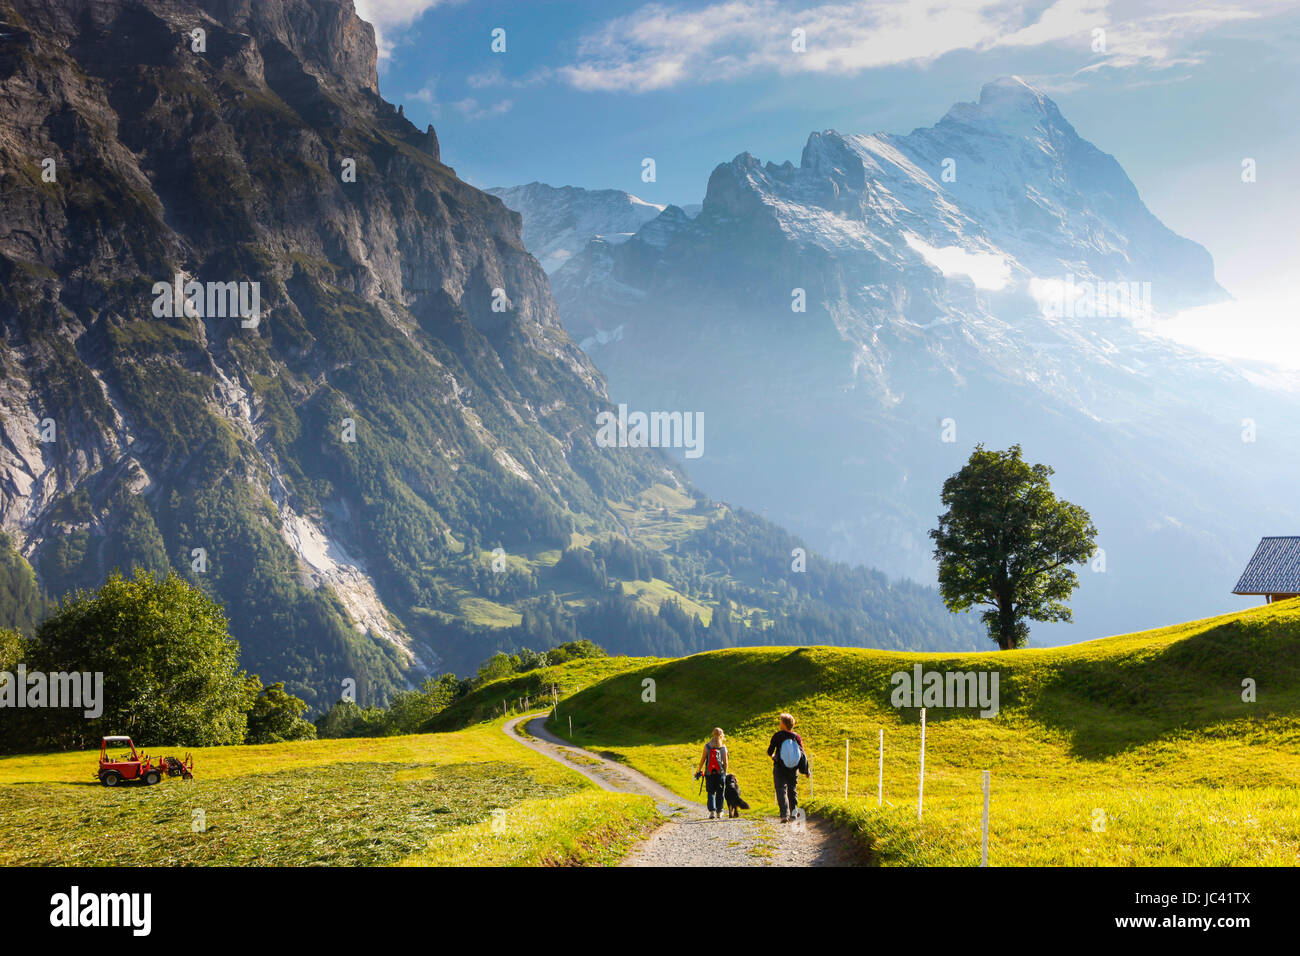 Two hikers and a dog are walking through a farmers pasture down into the valley of Grindelwald in the Swiss Alps. The famous Eiger mountain is in the background. This region of the Bernese Oberland is very popular by outdoor lovers like hikers, climbers and paragliders. The hike shown leads from Grosse Scheidegg pass to the village of Grindelwald. Stock Photo